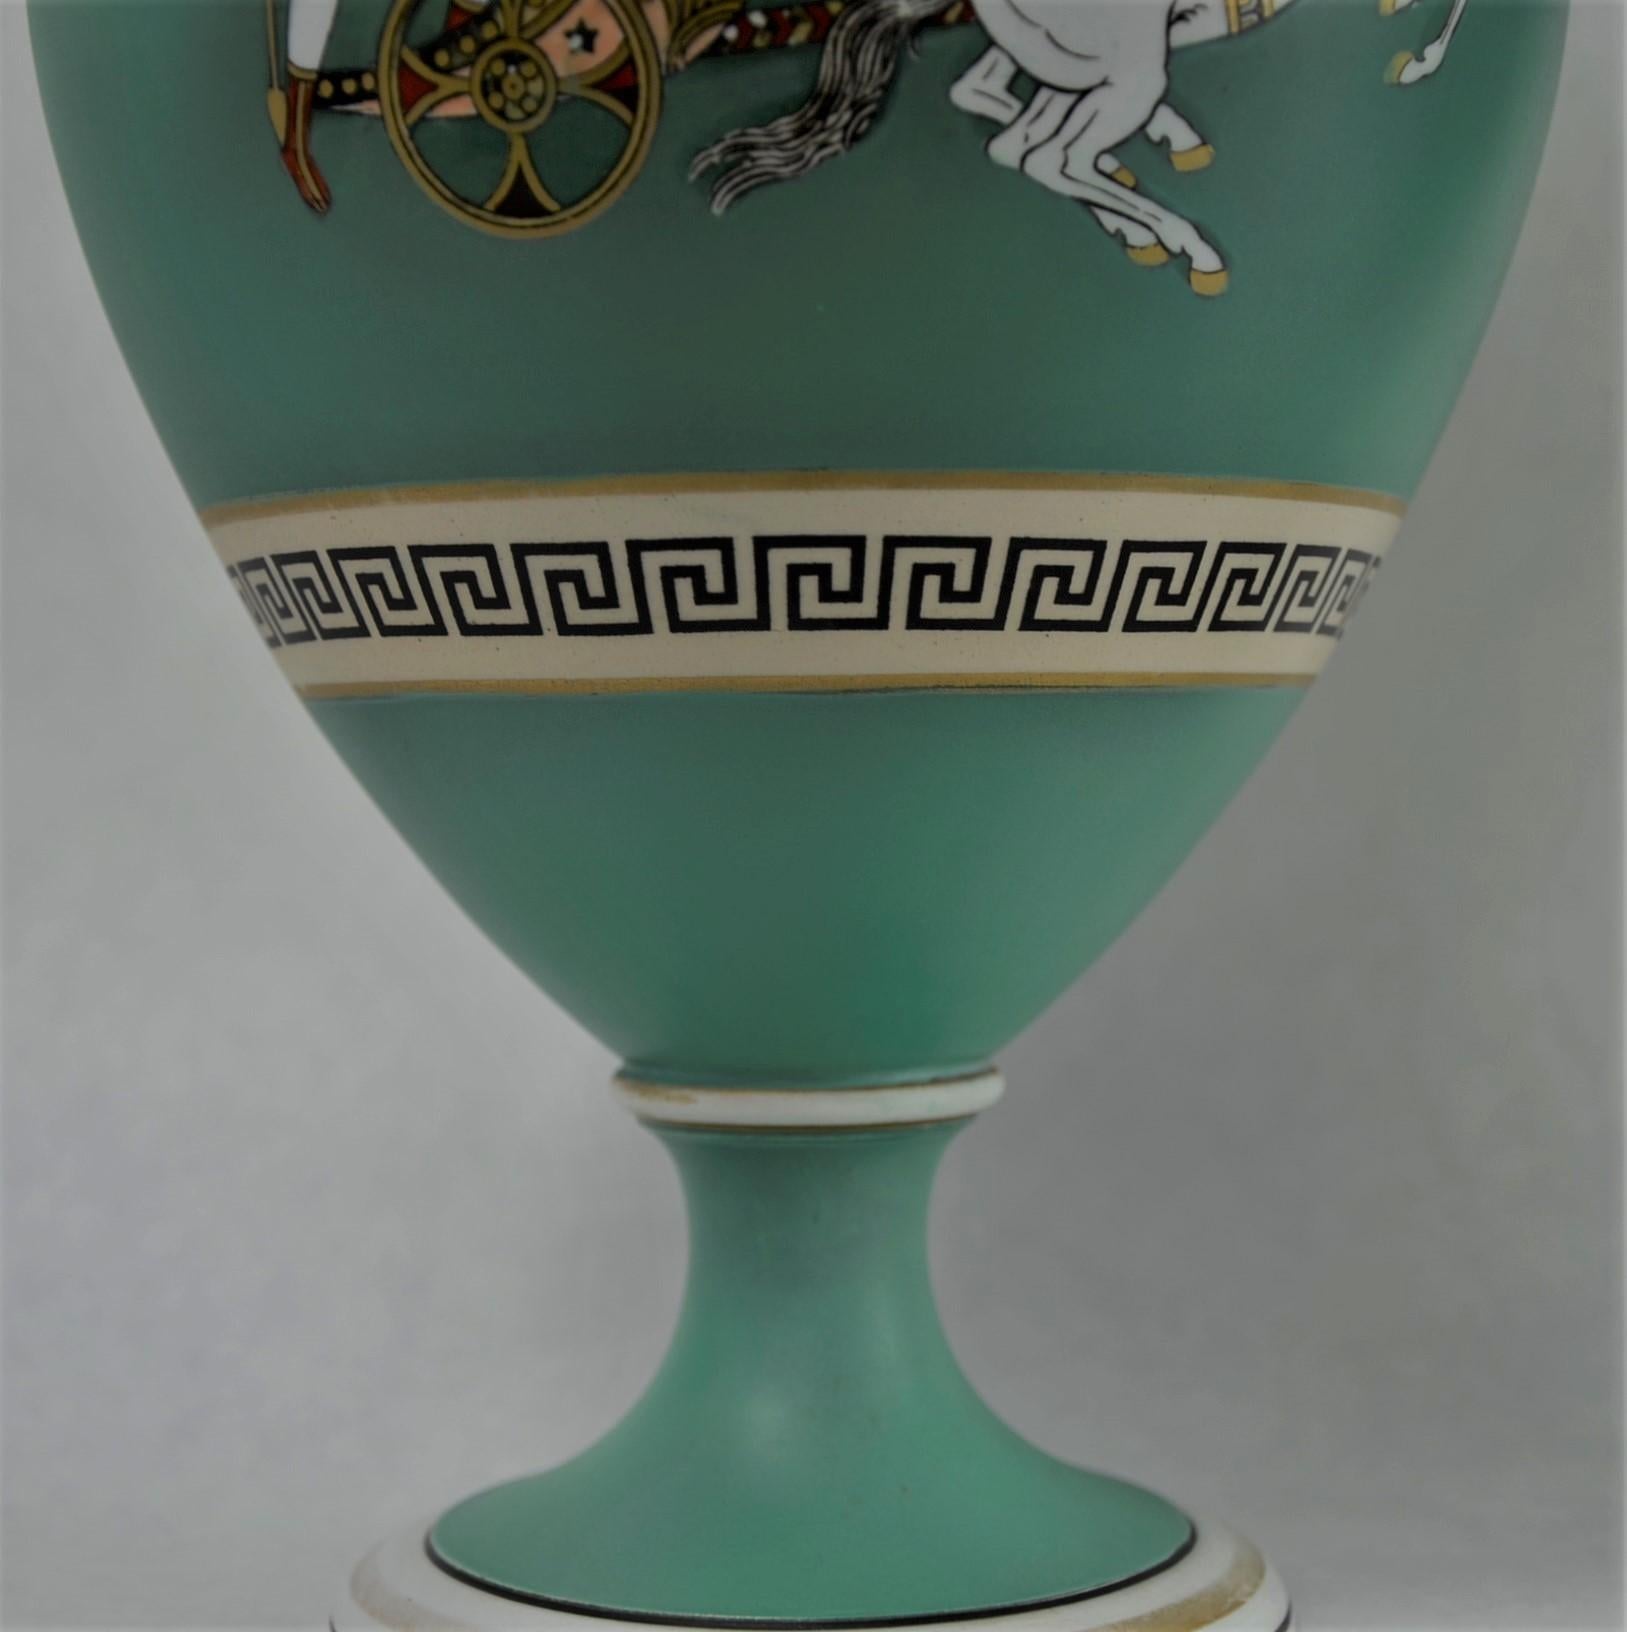 Neoclassical Revival Green, Gold & Black Earthenware Grecian/Roman Themed Greek Key Vases/Urns, Pair For Sale